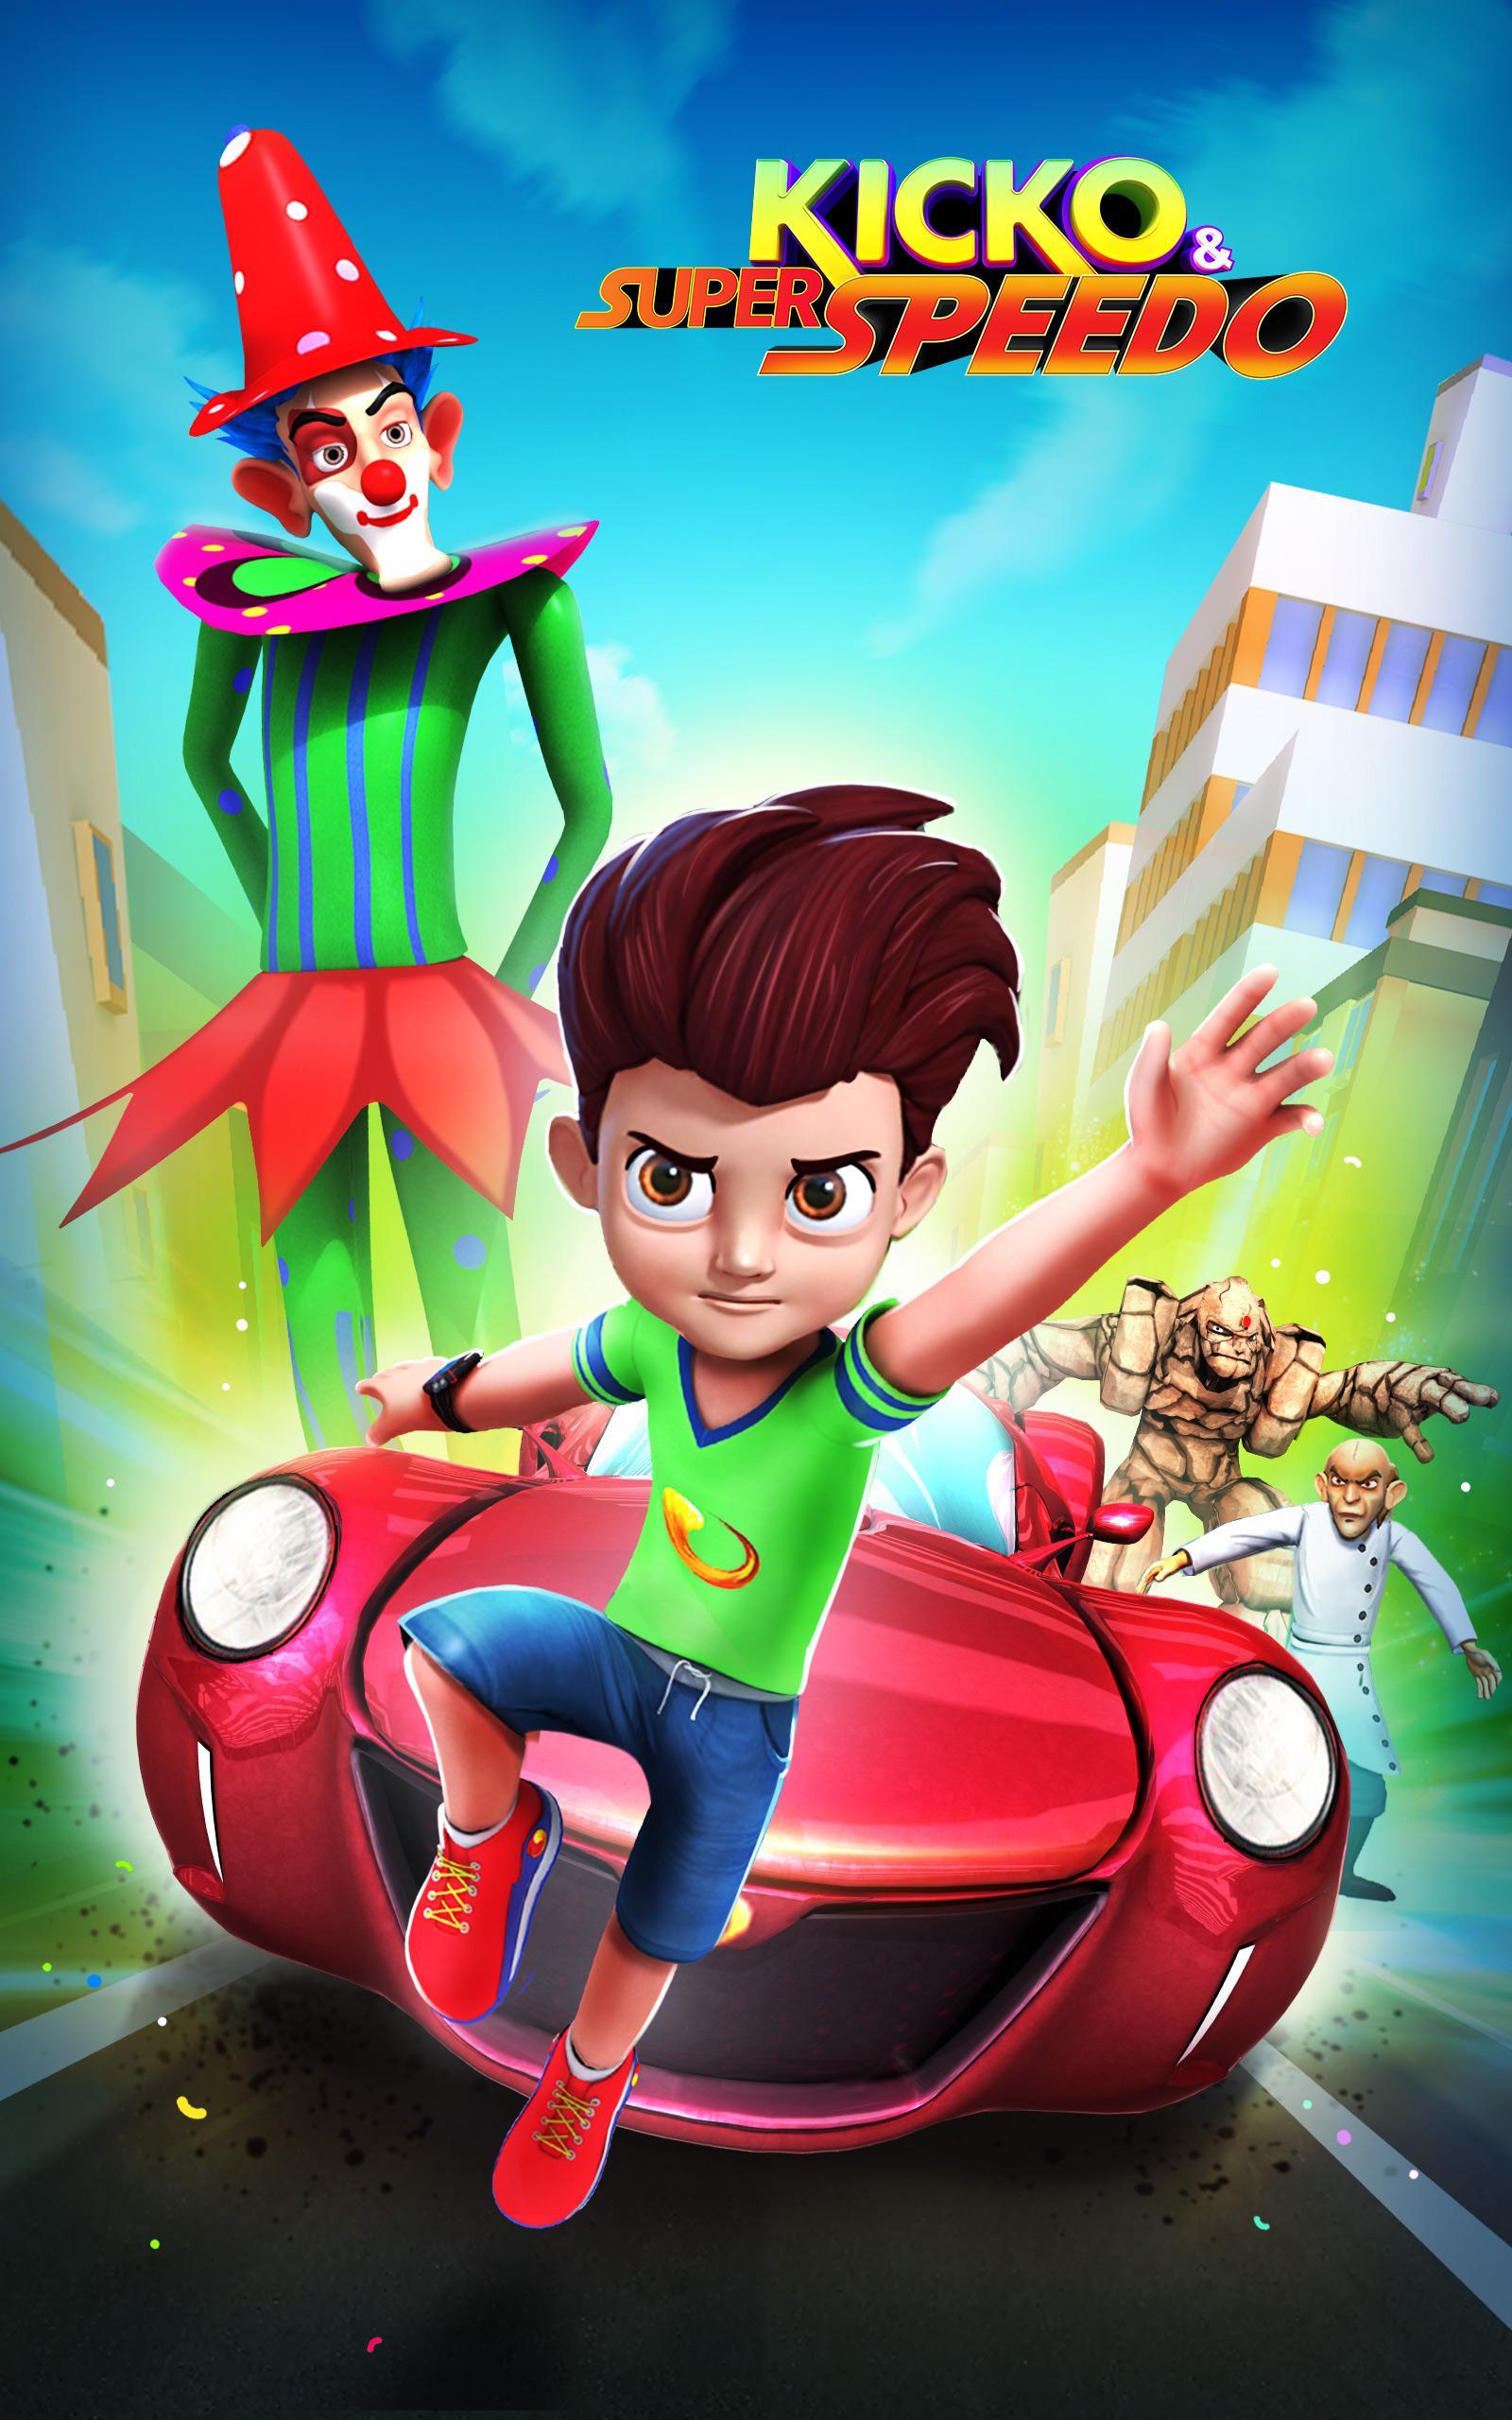 Kicko & Super Speedo for Android - APK Download